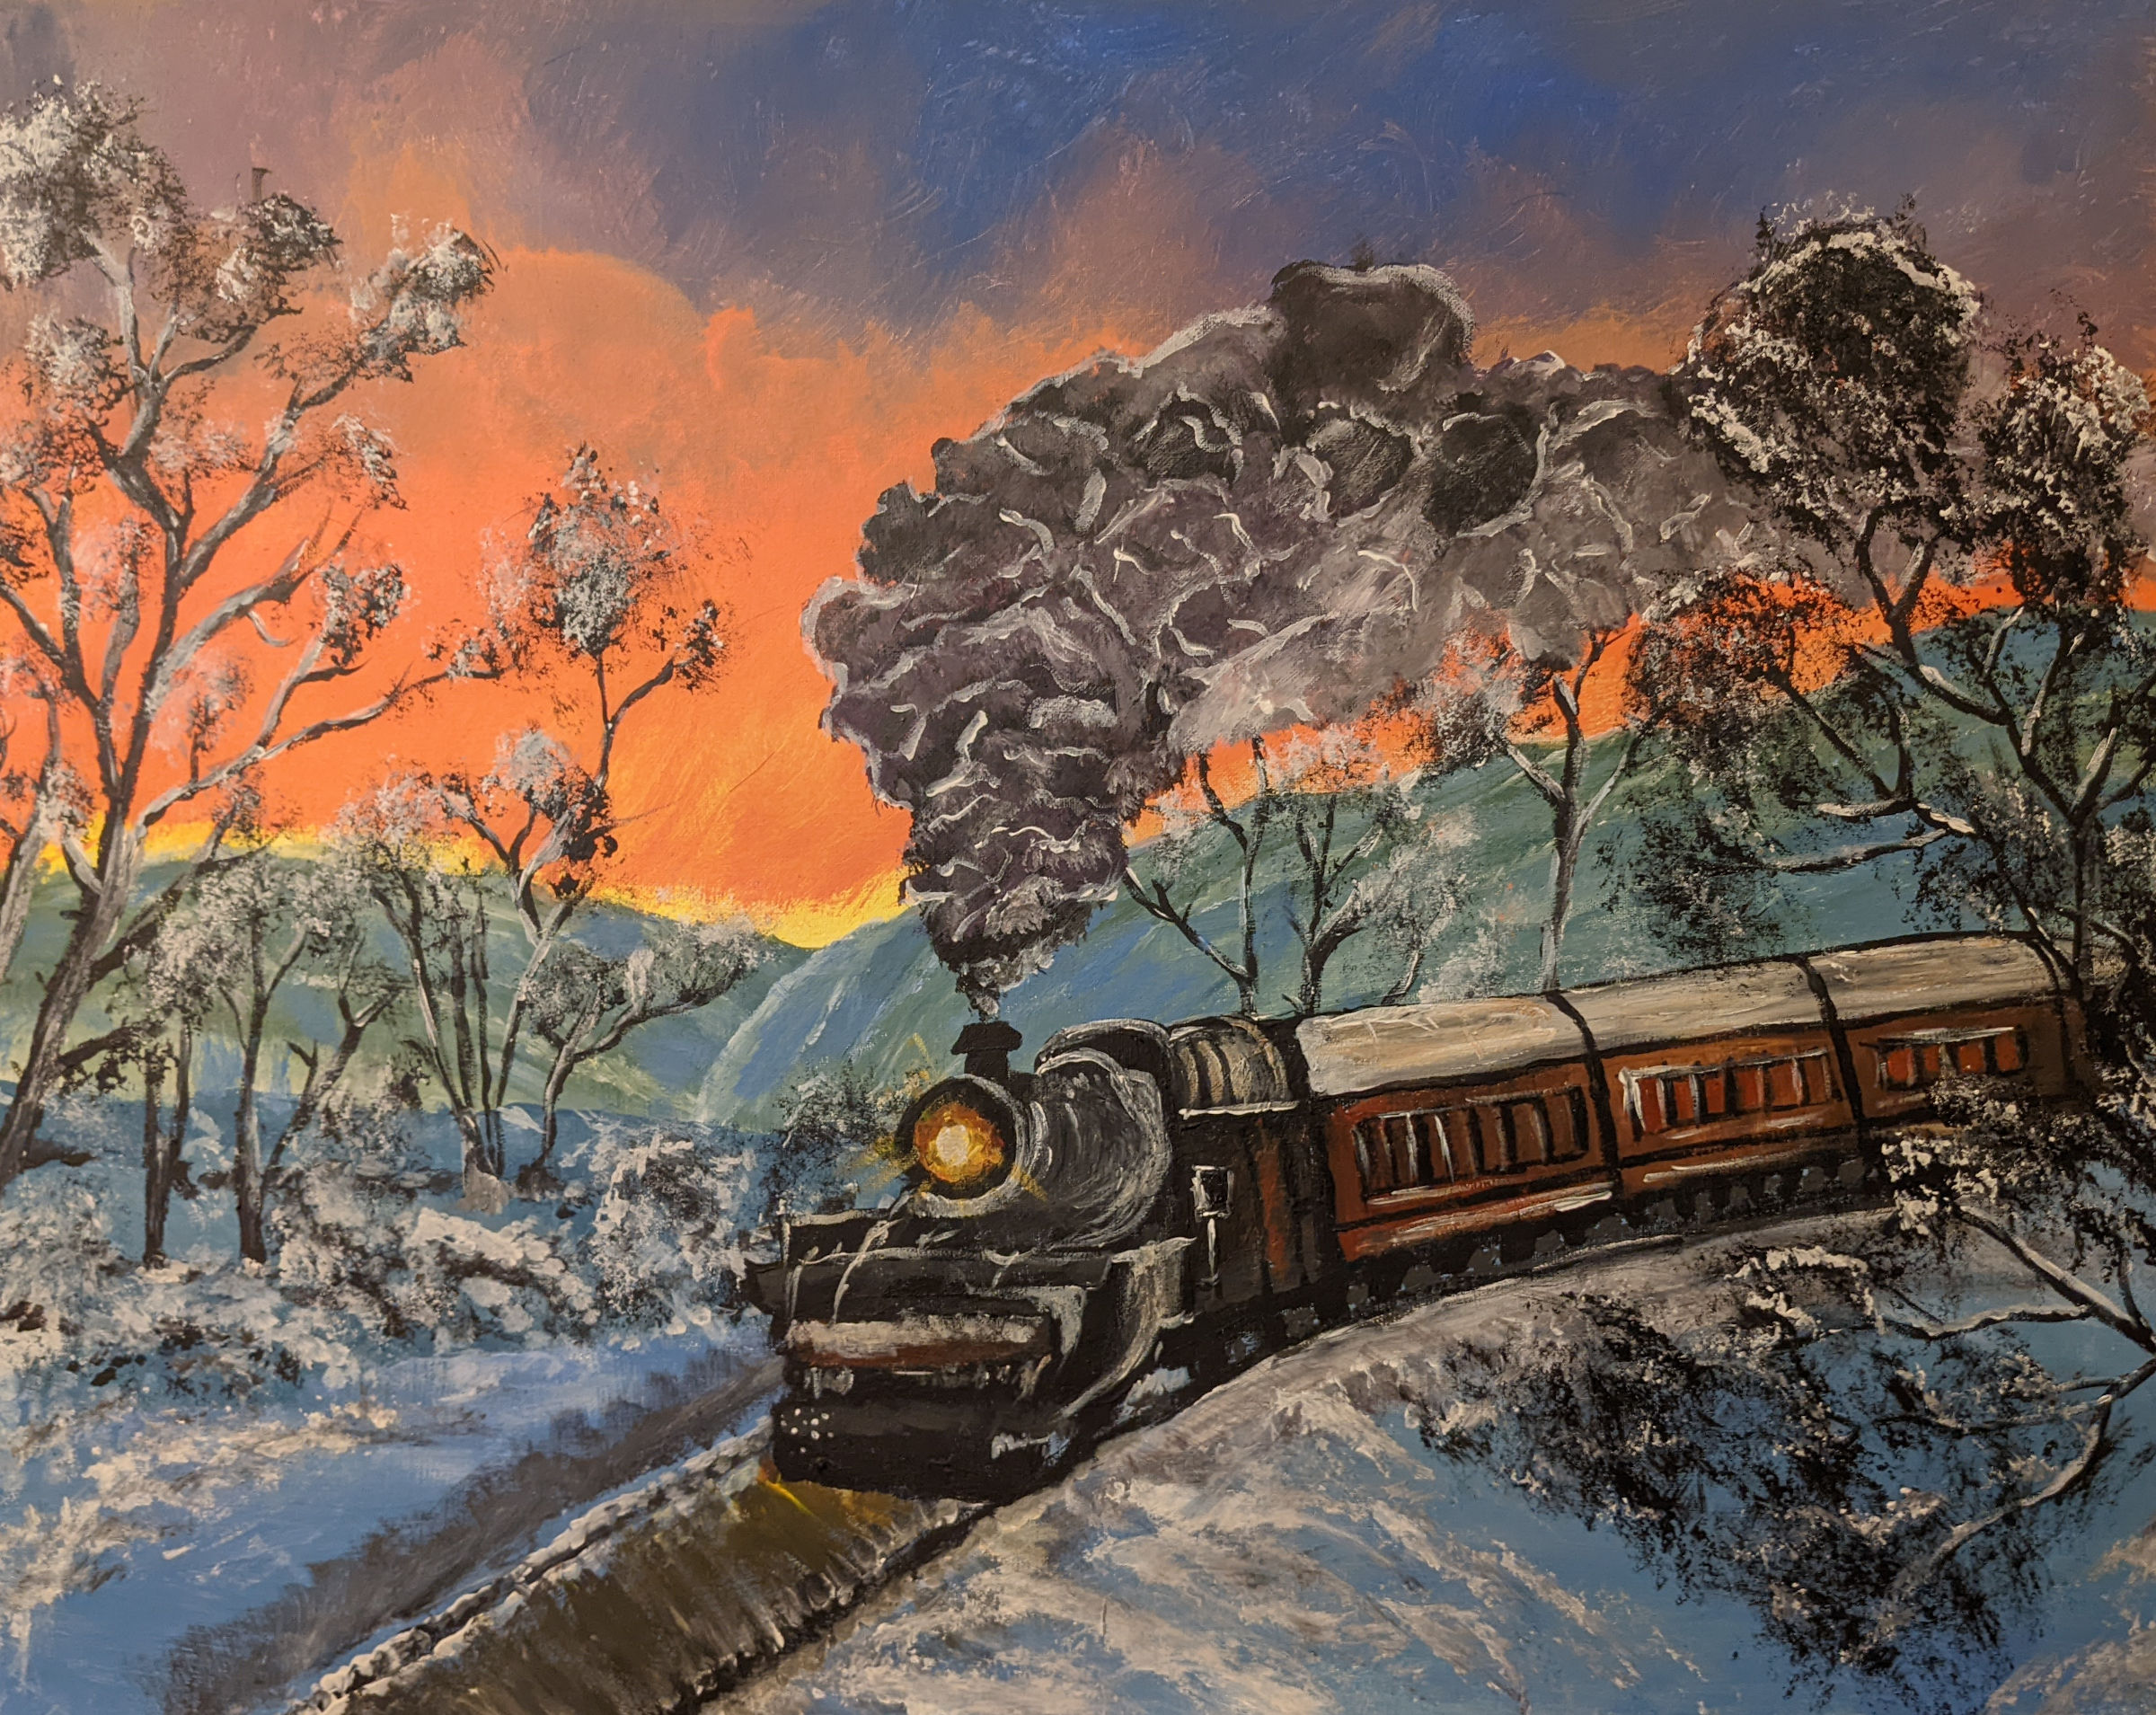 Train traveling down the tracks in the snow. Trees surround it in the foreground and background. Snowy mountains are in the distance, and the sky is a bright orange.